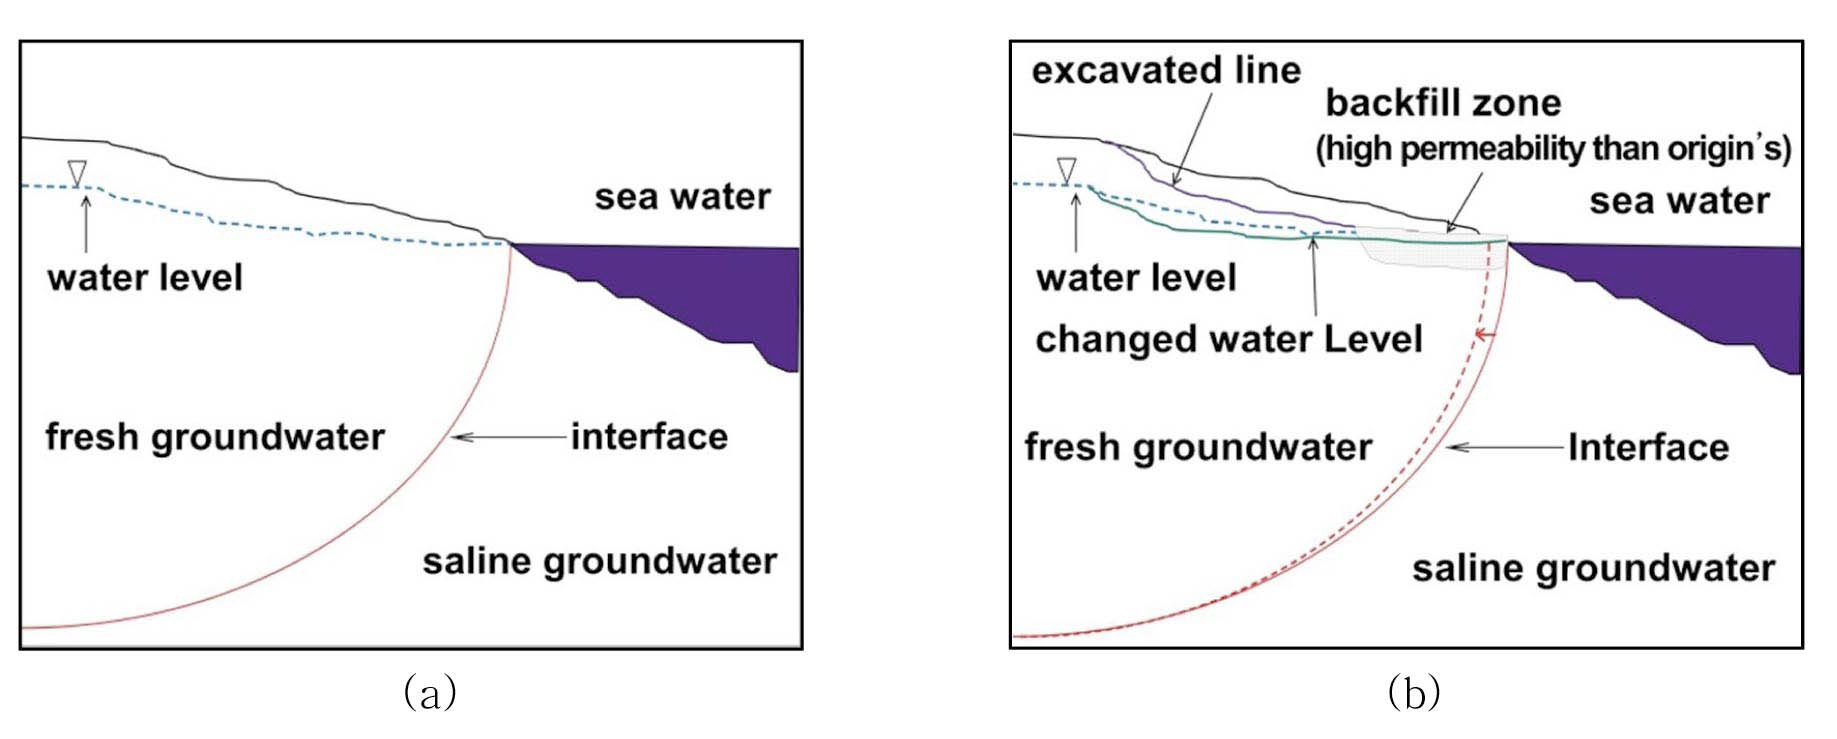 A simplified Conceptual Model for (a) Original Water Level and Interface between Fresh and Saline Groundwater in Natural Condition and (b) Changed Water Level and Interface after Construction Activities Such as Artificial Slope Cut, Excavation and Backfill with High Permeability Media, and Reclamation.